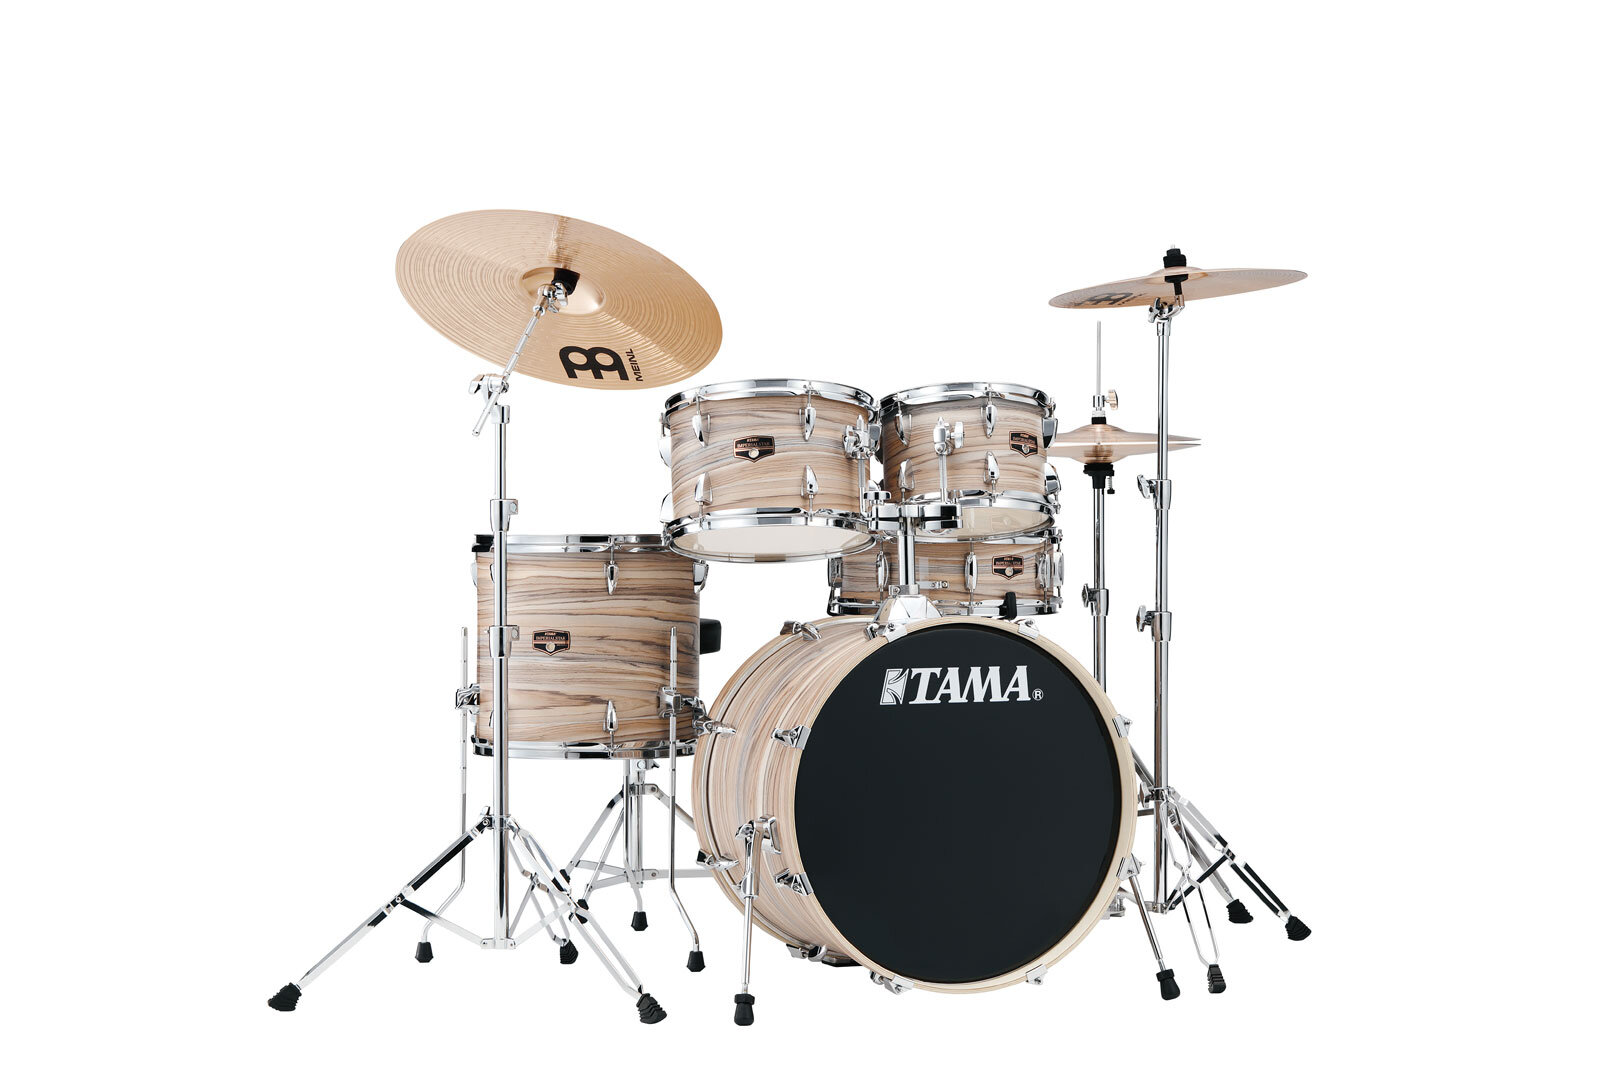 Tama Imperial Star and 20 